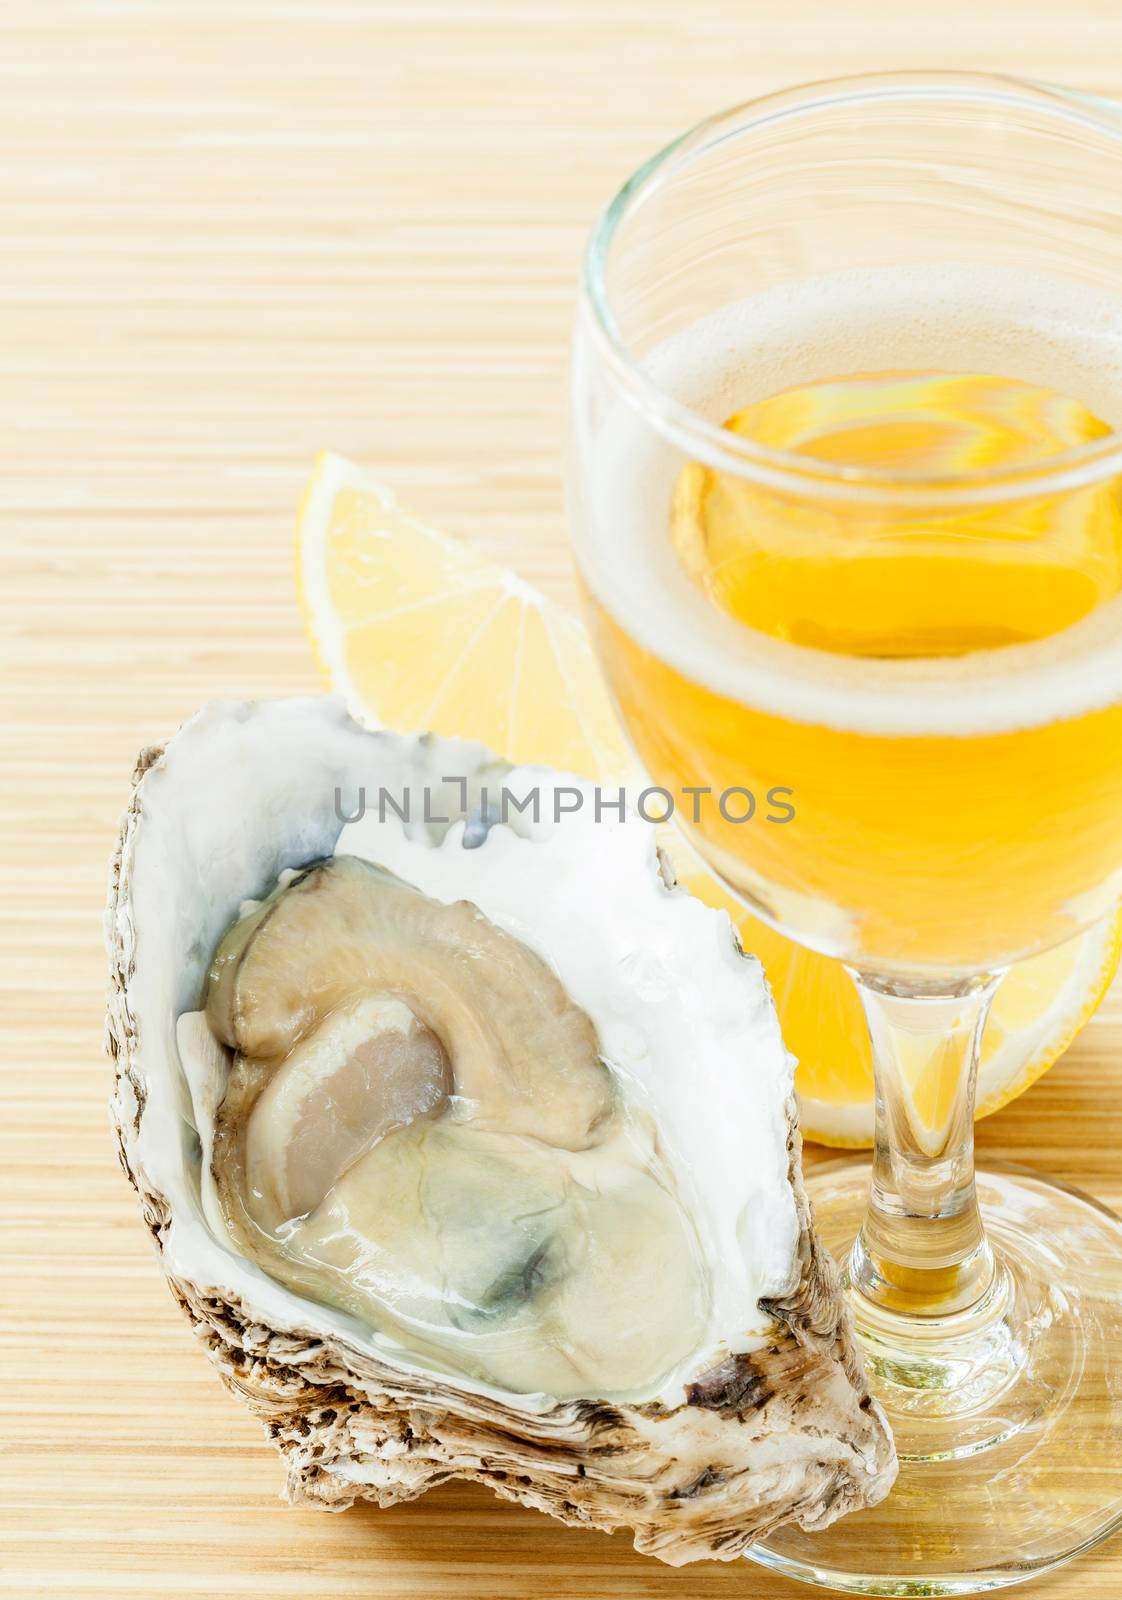 Fresh oysters with lemon and a glass of wine on a wooden table . by kerdkanno